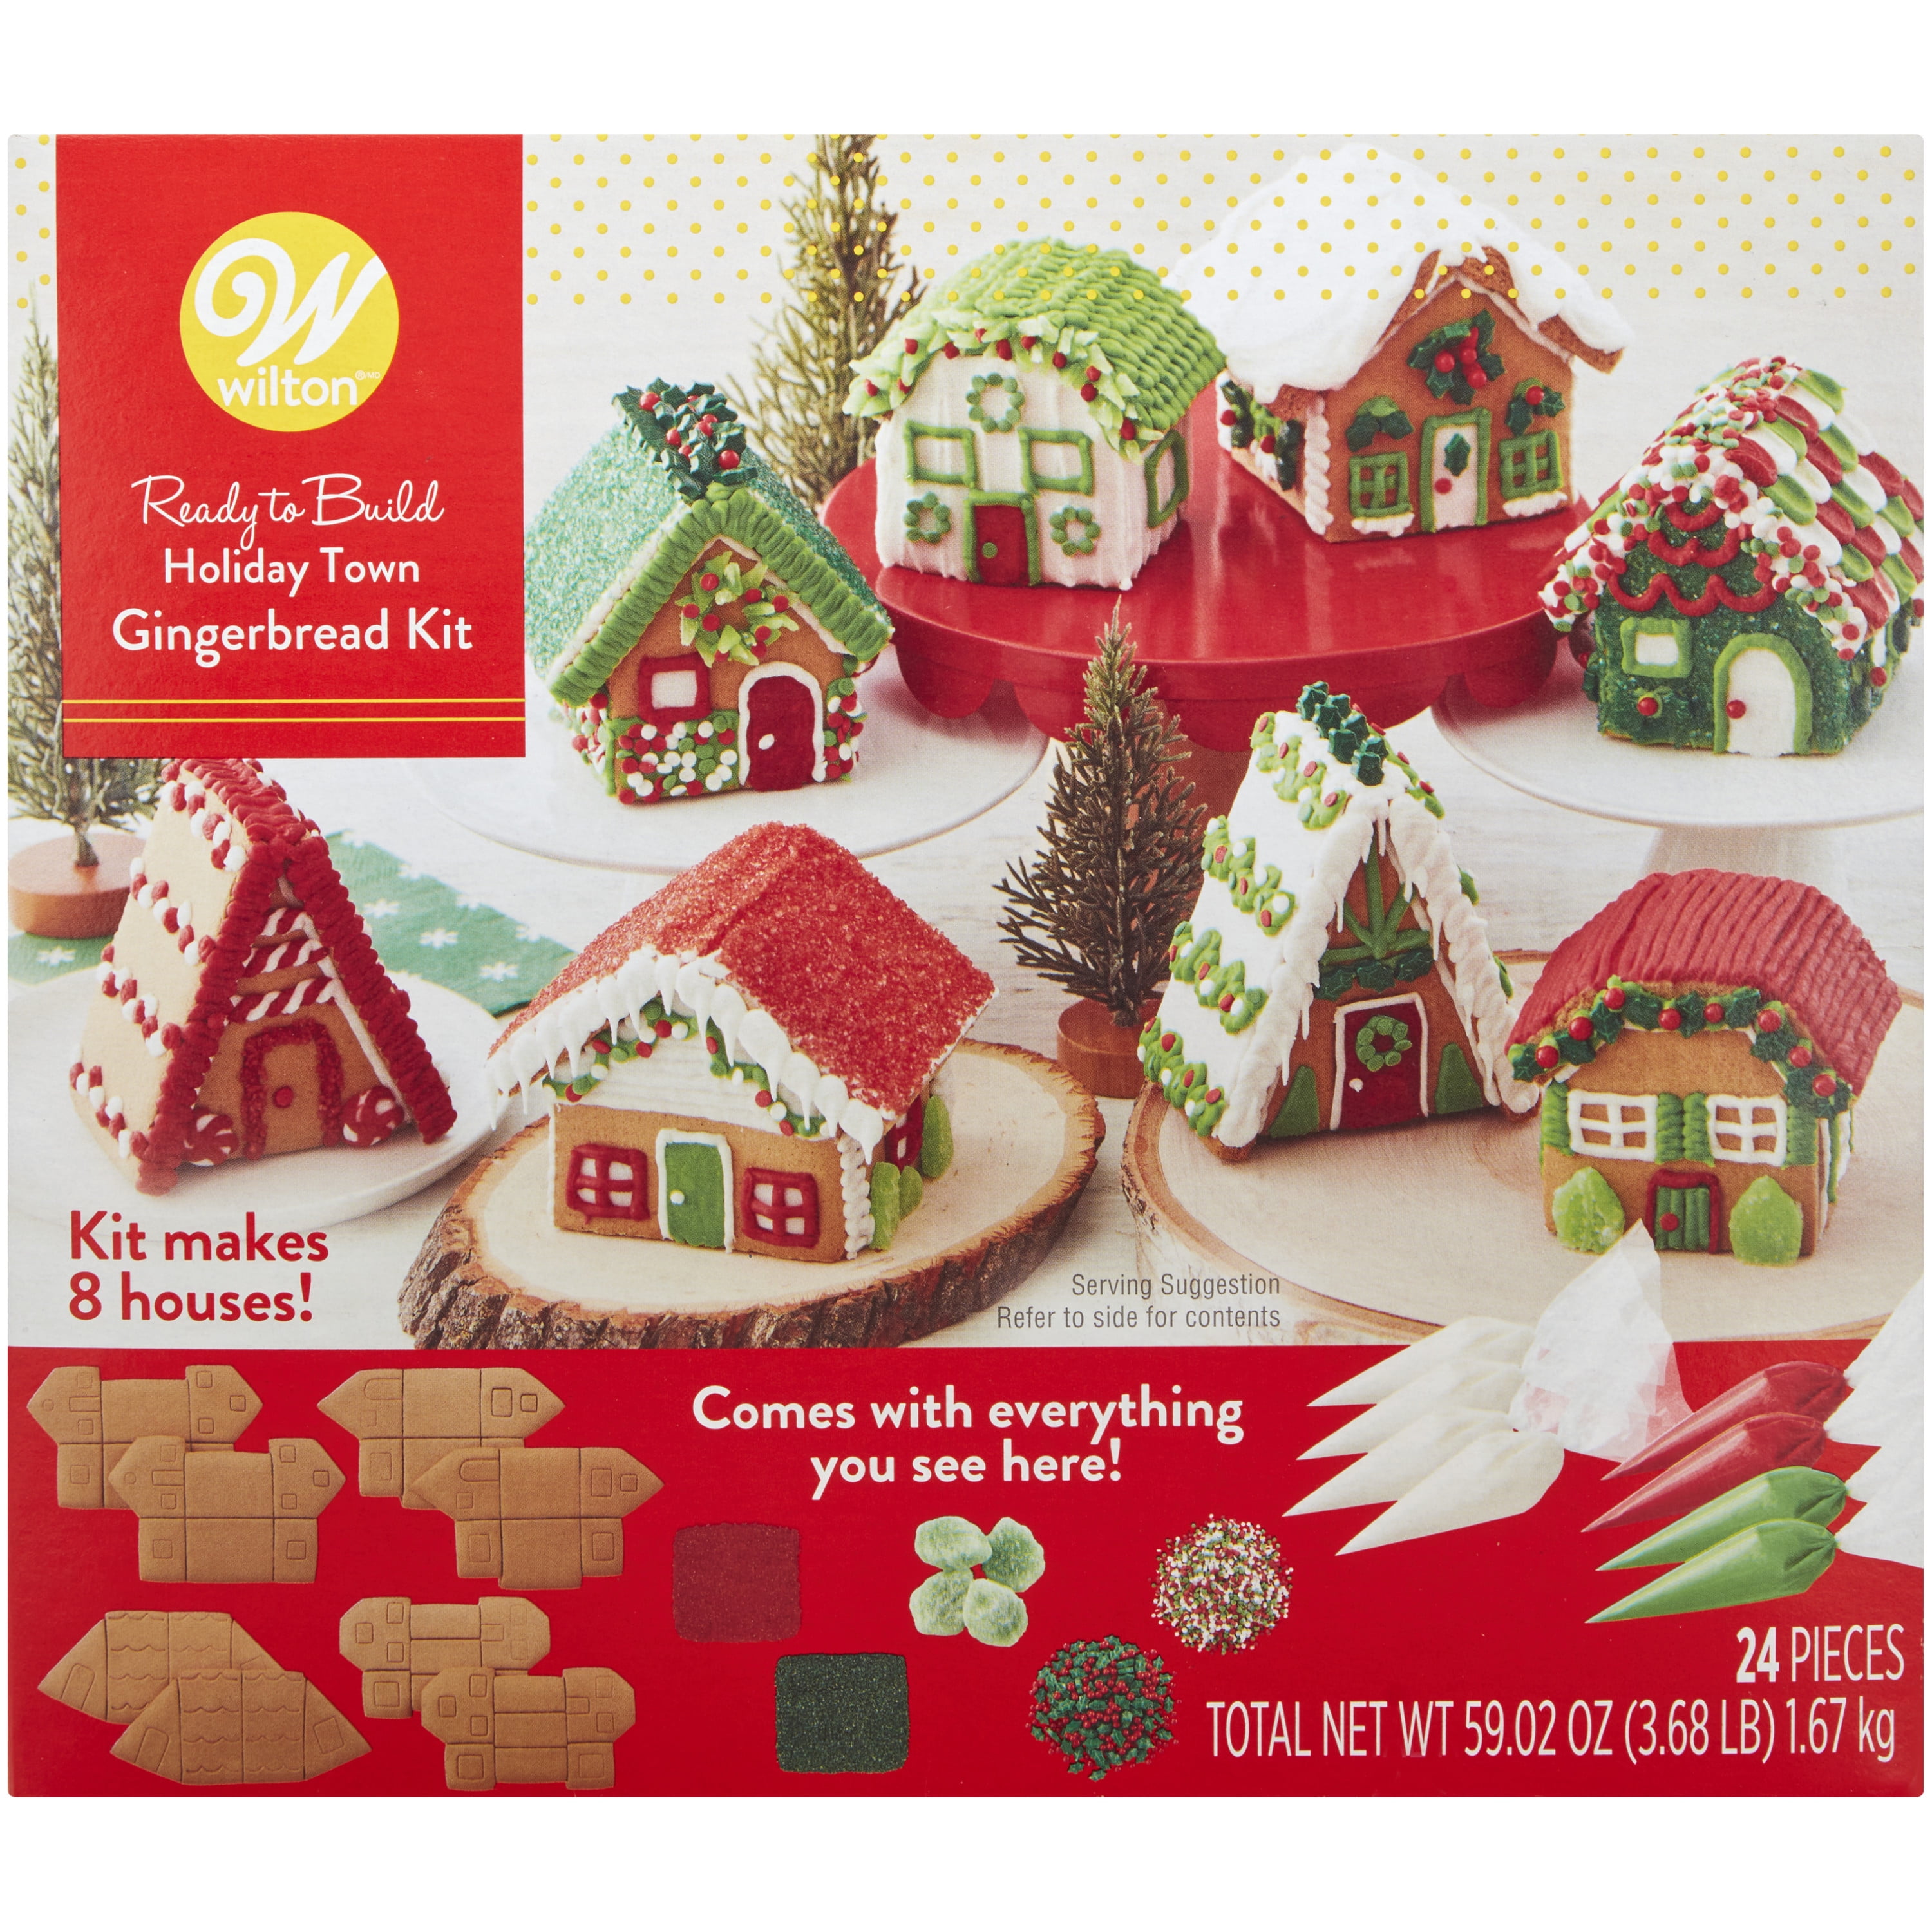 Ready-to-Decorate Gingerbread House — The Gingerbread Factory